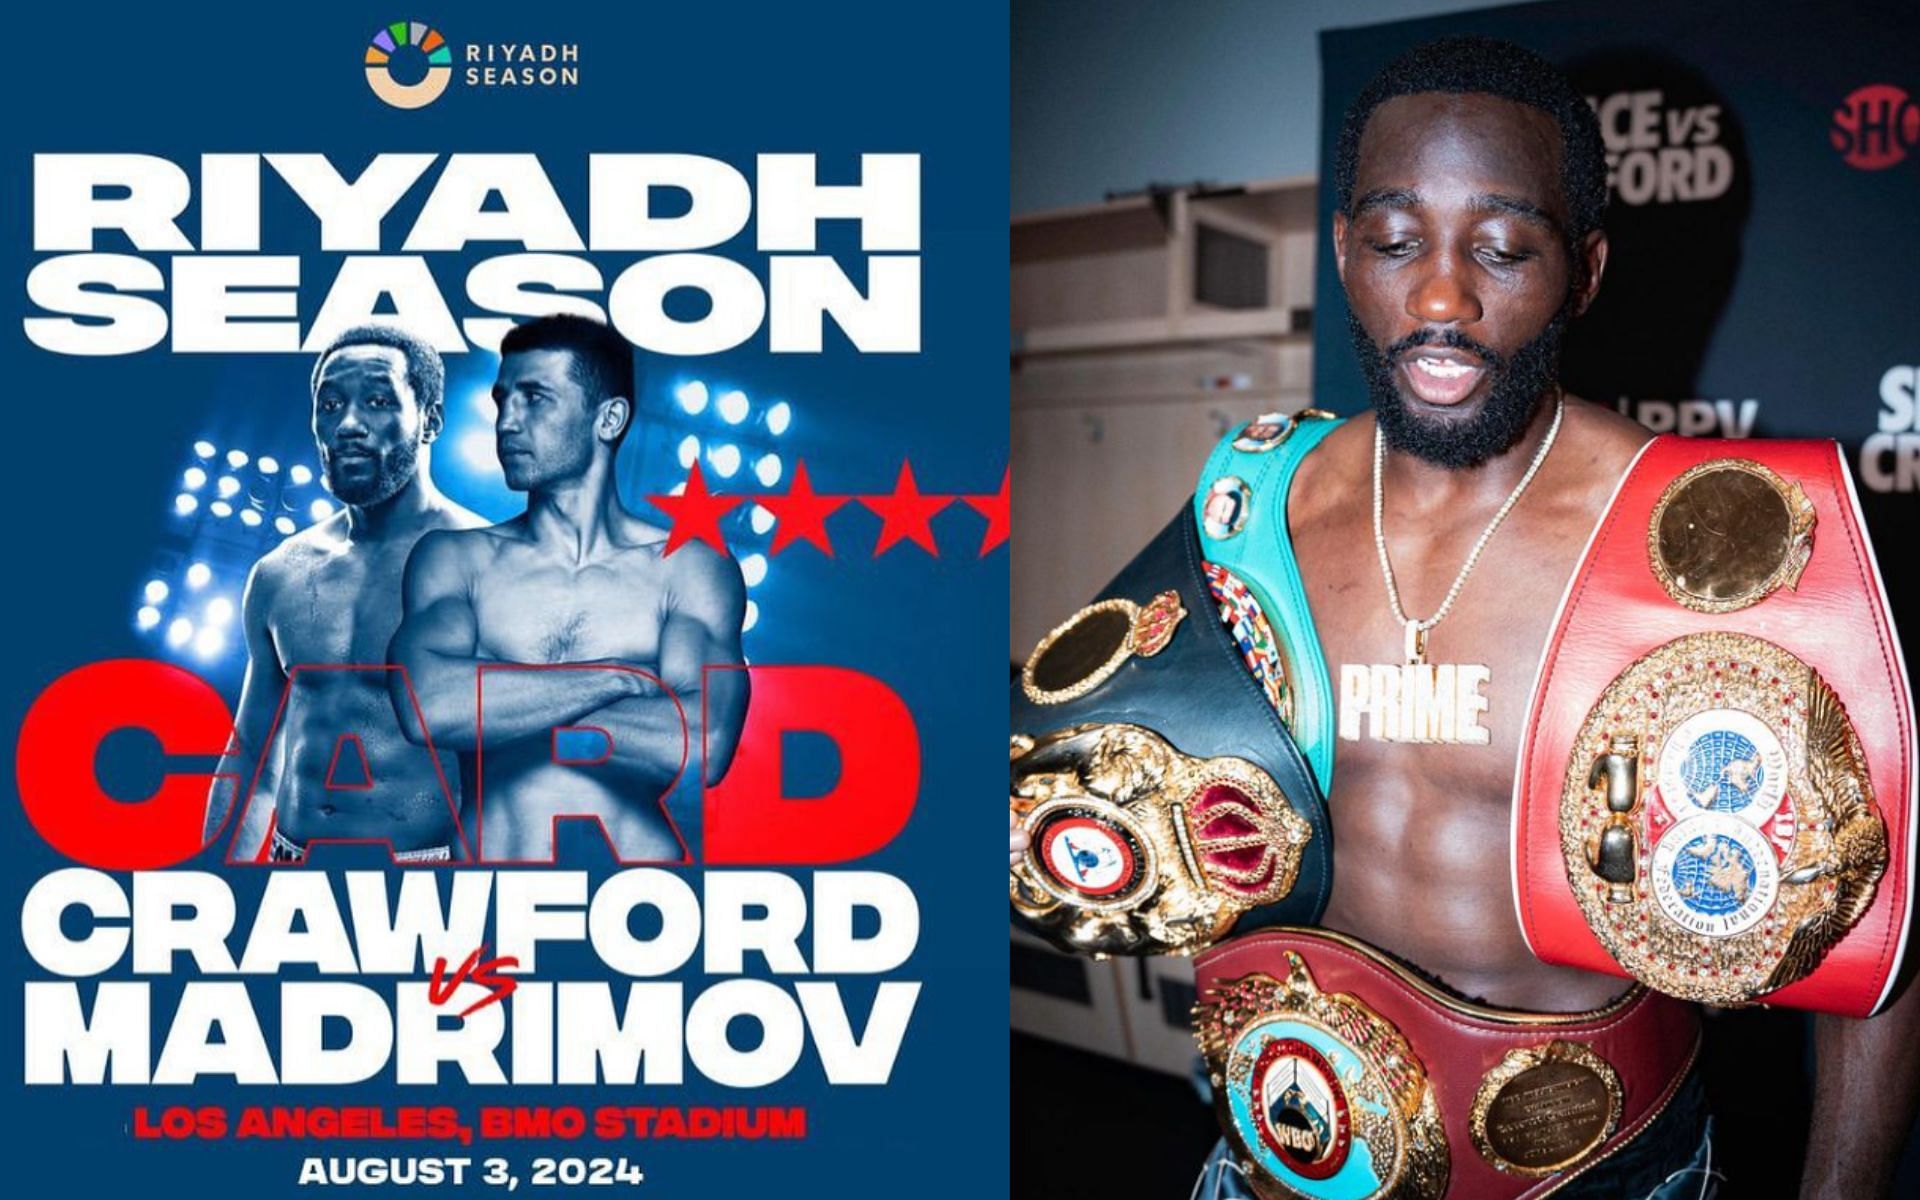 Terence Crawford (right) has eyes on an undisputed title fight at super welterweight, after his clash with Israil Madrimov (left) is announced [Images Courtesy: @tbudcrawford on Instagram]